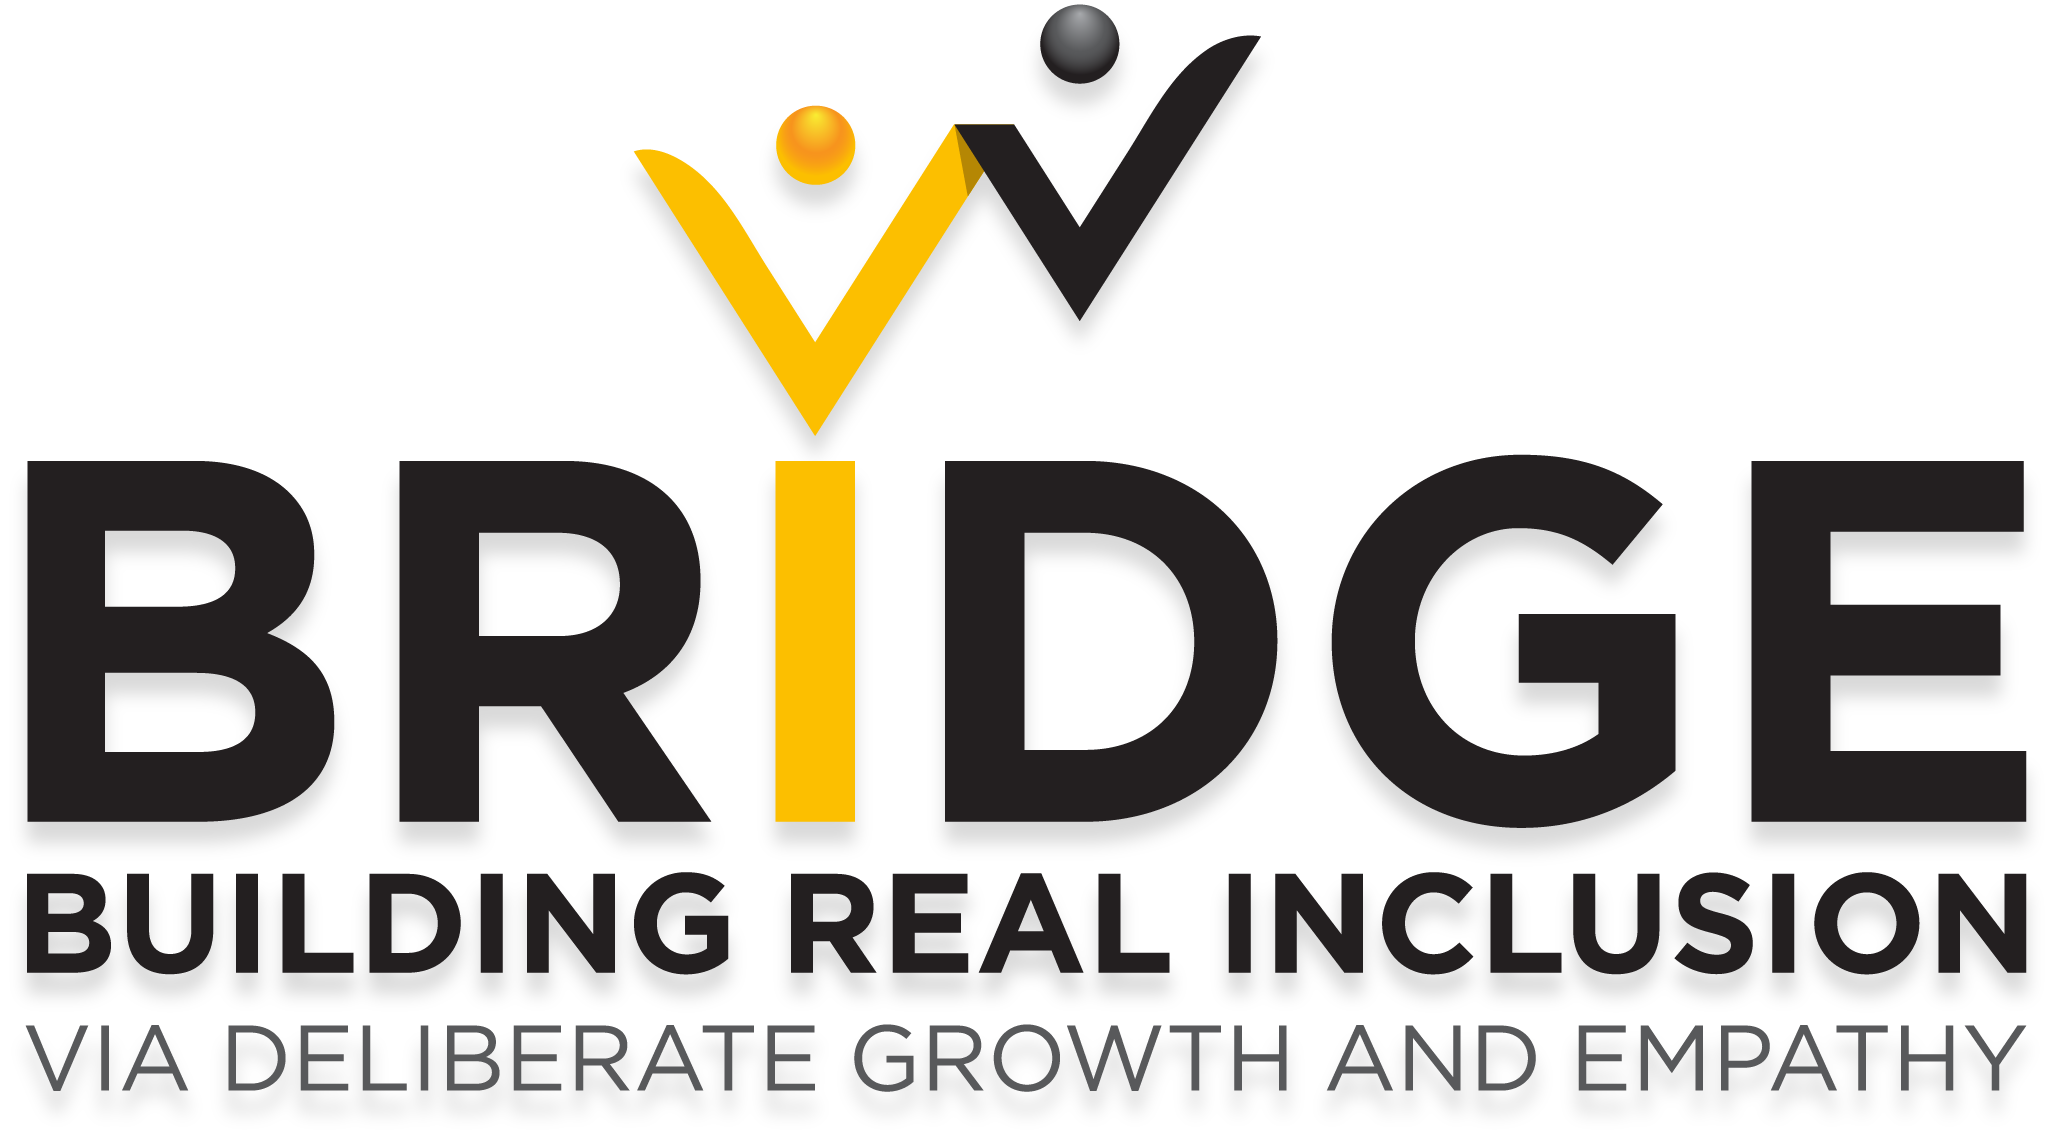 Affinitiv BRIDGE - Building Real Inclusion Via Deliberate Growth and Empathy